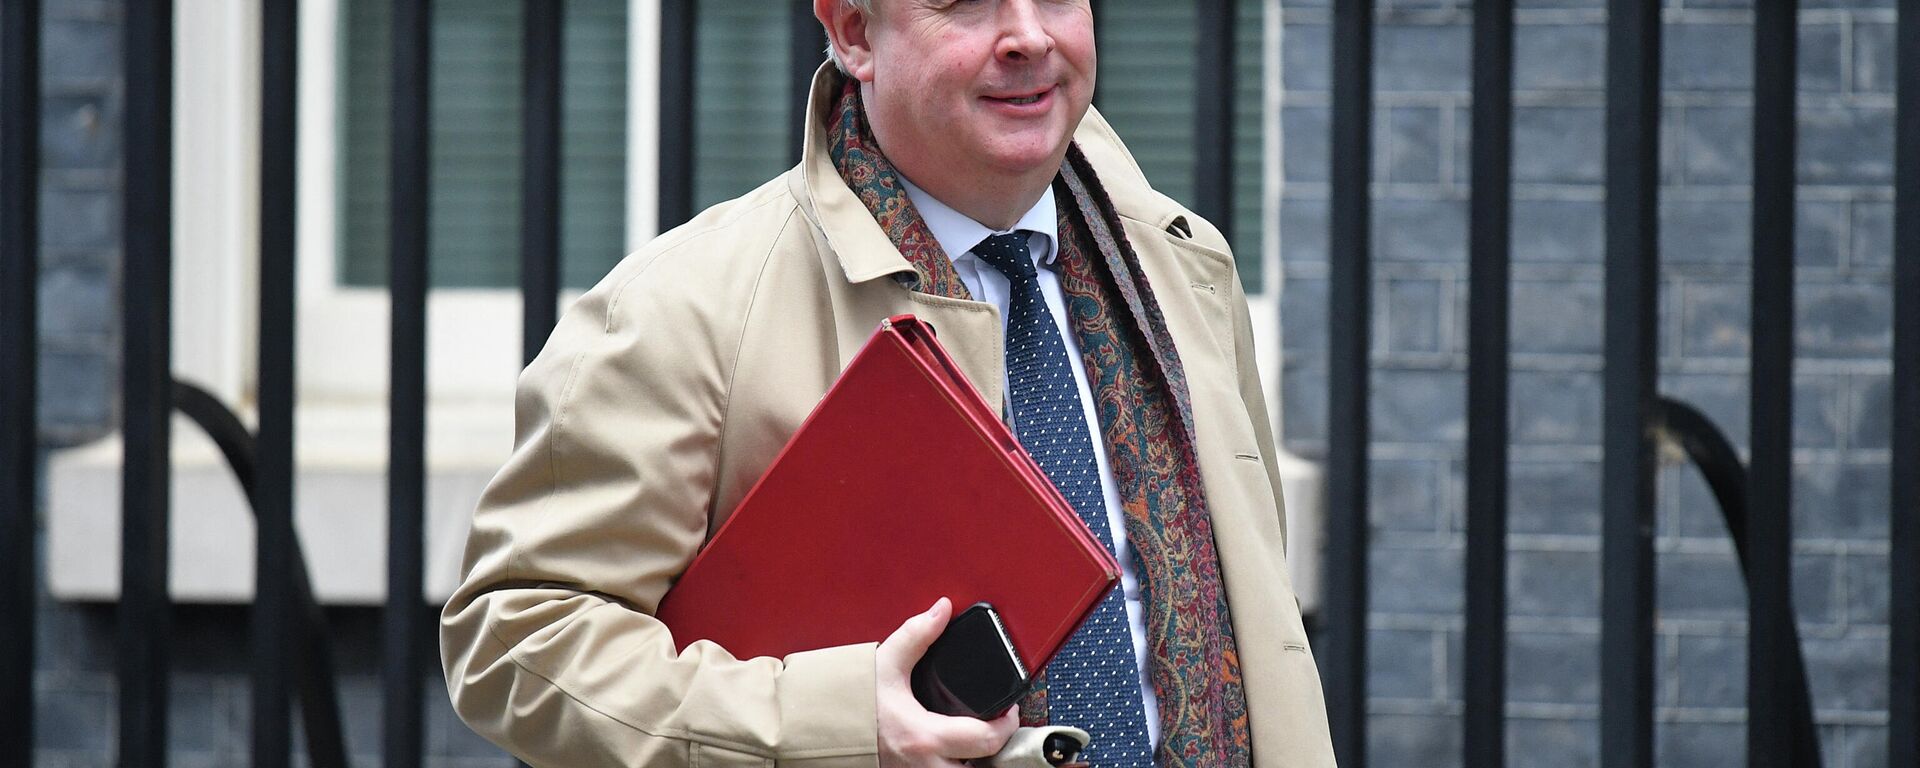 Britain's Attorney General Geoffrey Cox leaves after a meeting of the cabinet at 10 Downing Street in London on February 11, 2020. - Sputnik International, 1920, 10.11.2021